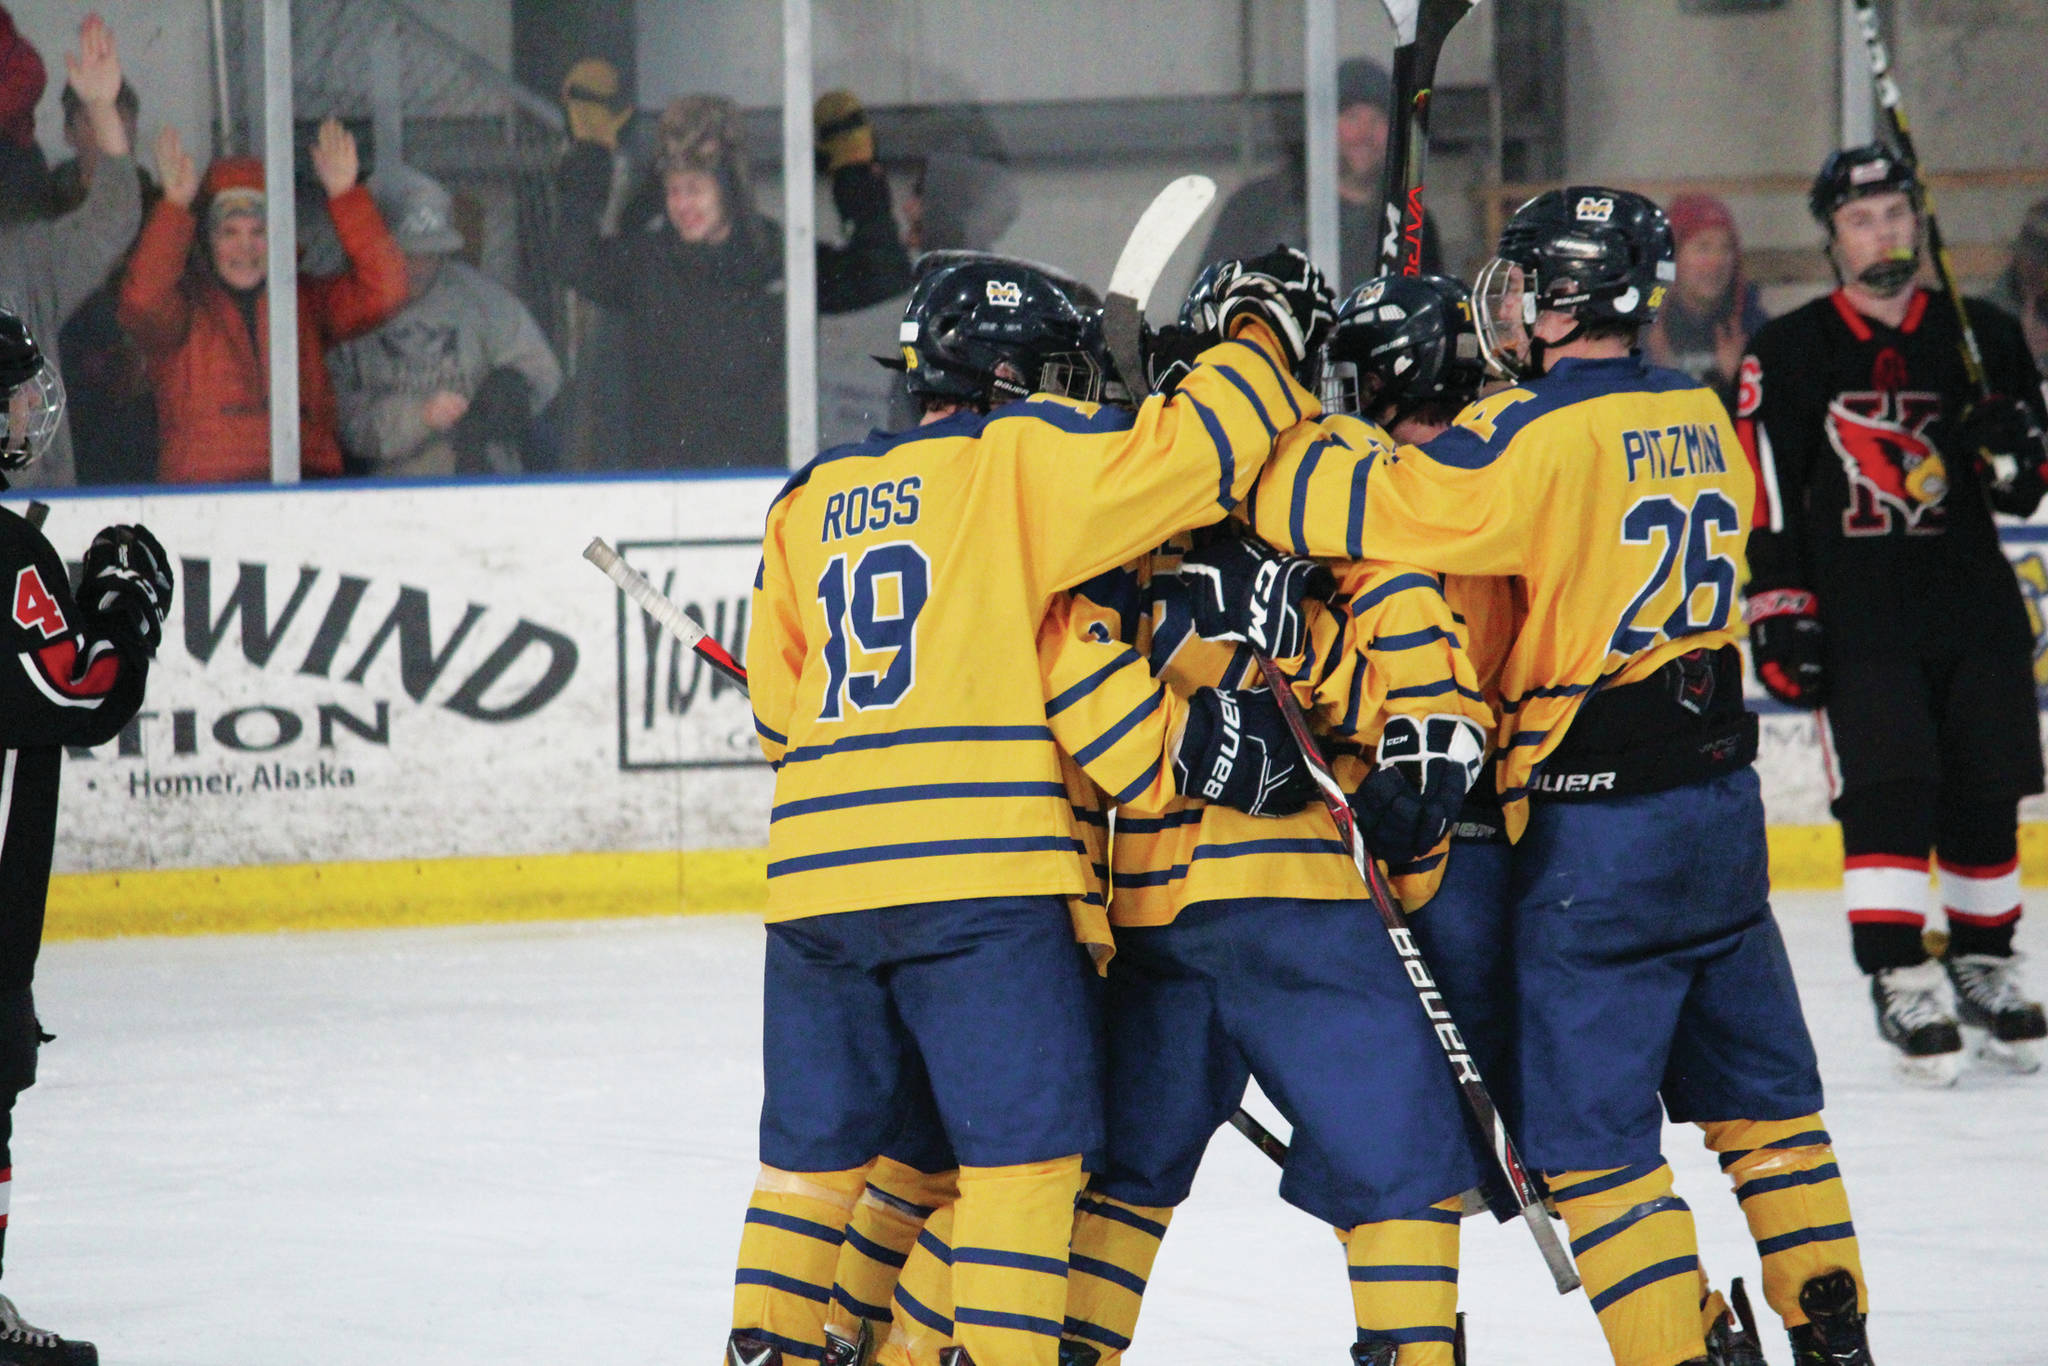 The Mariners celebrate a goal during a Saturday, Nov. 23, 2019 hockey game against Kenai Central High School at Kevin Bell Arena in Homer, Alaska. (Photo by Megan Pacer/Homer News)